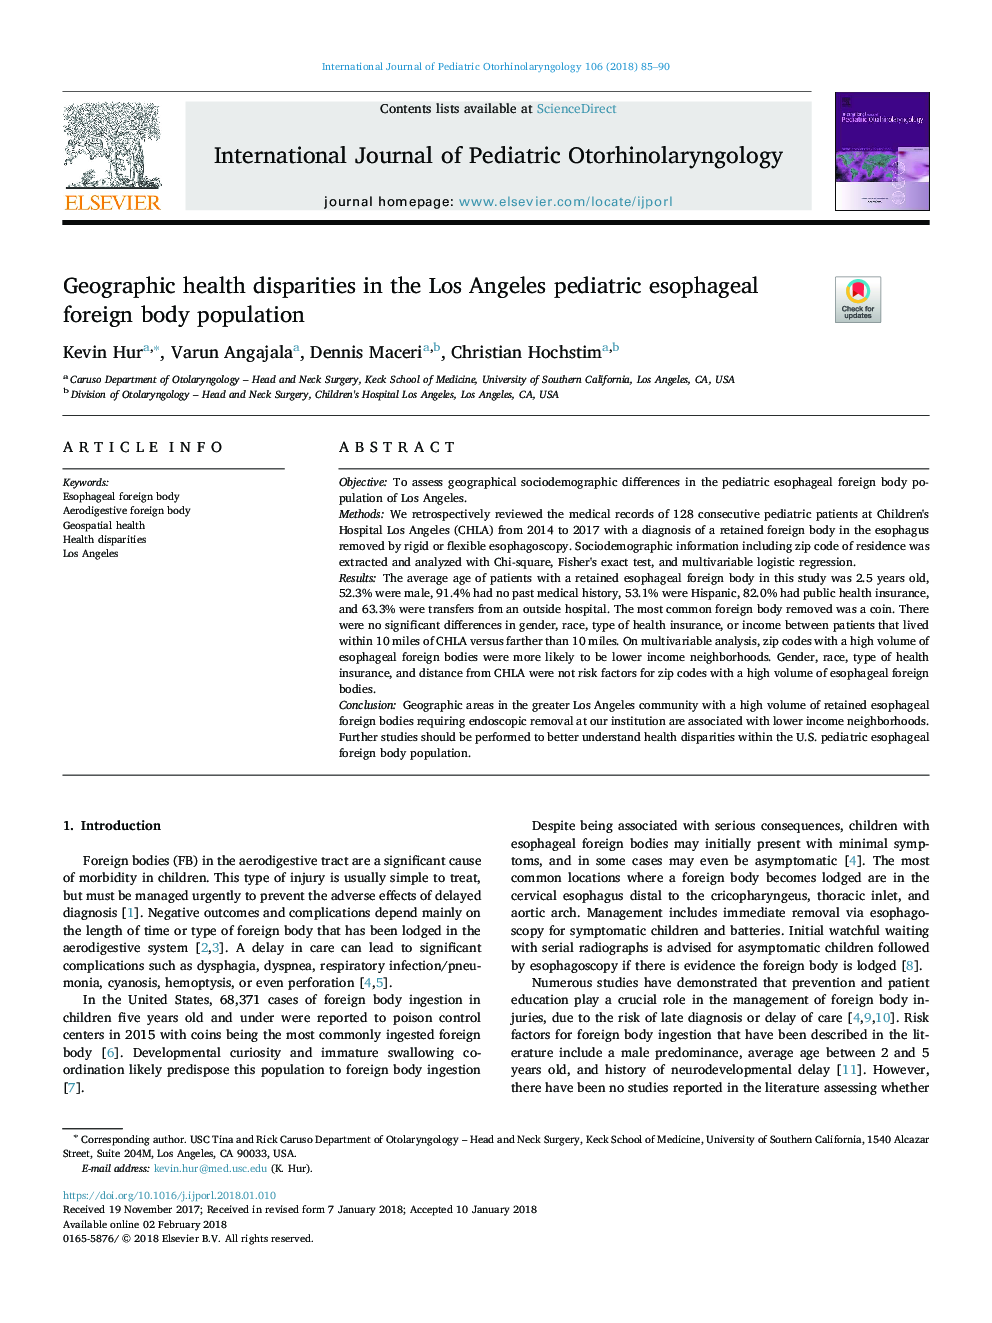 Geographic health disparities in the Los Angeles pediatric esophageal foreign body population